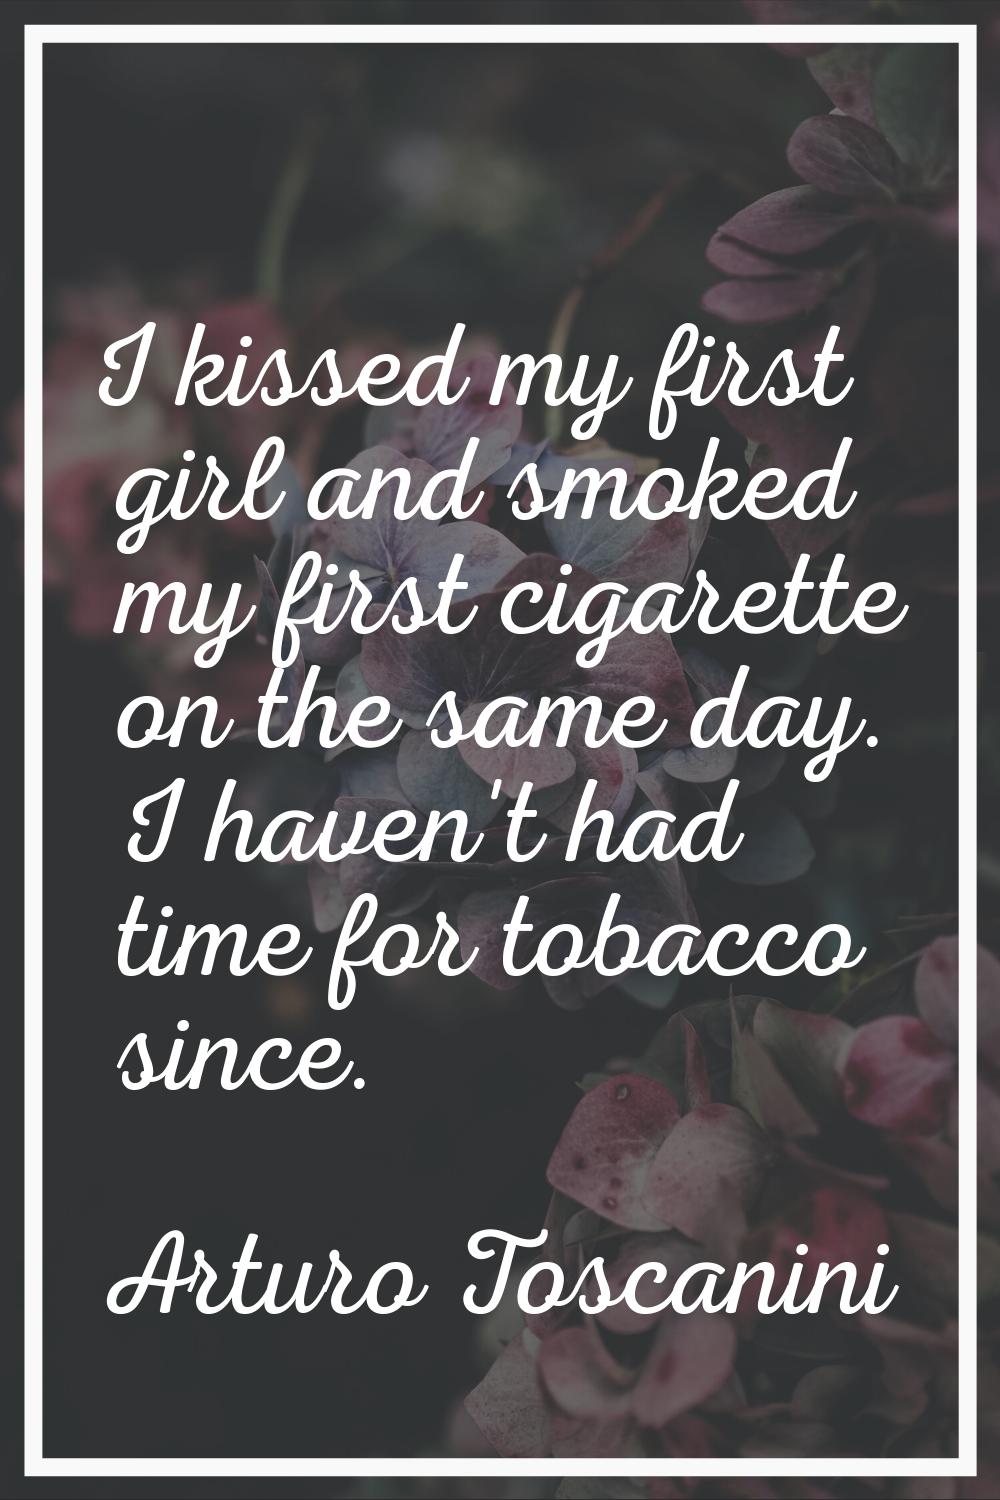 I kissed my first girl and smoked my first cigarette on the same day. I haven't had time for tobacc